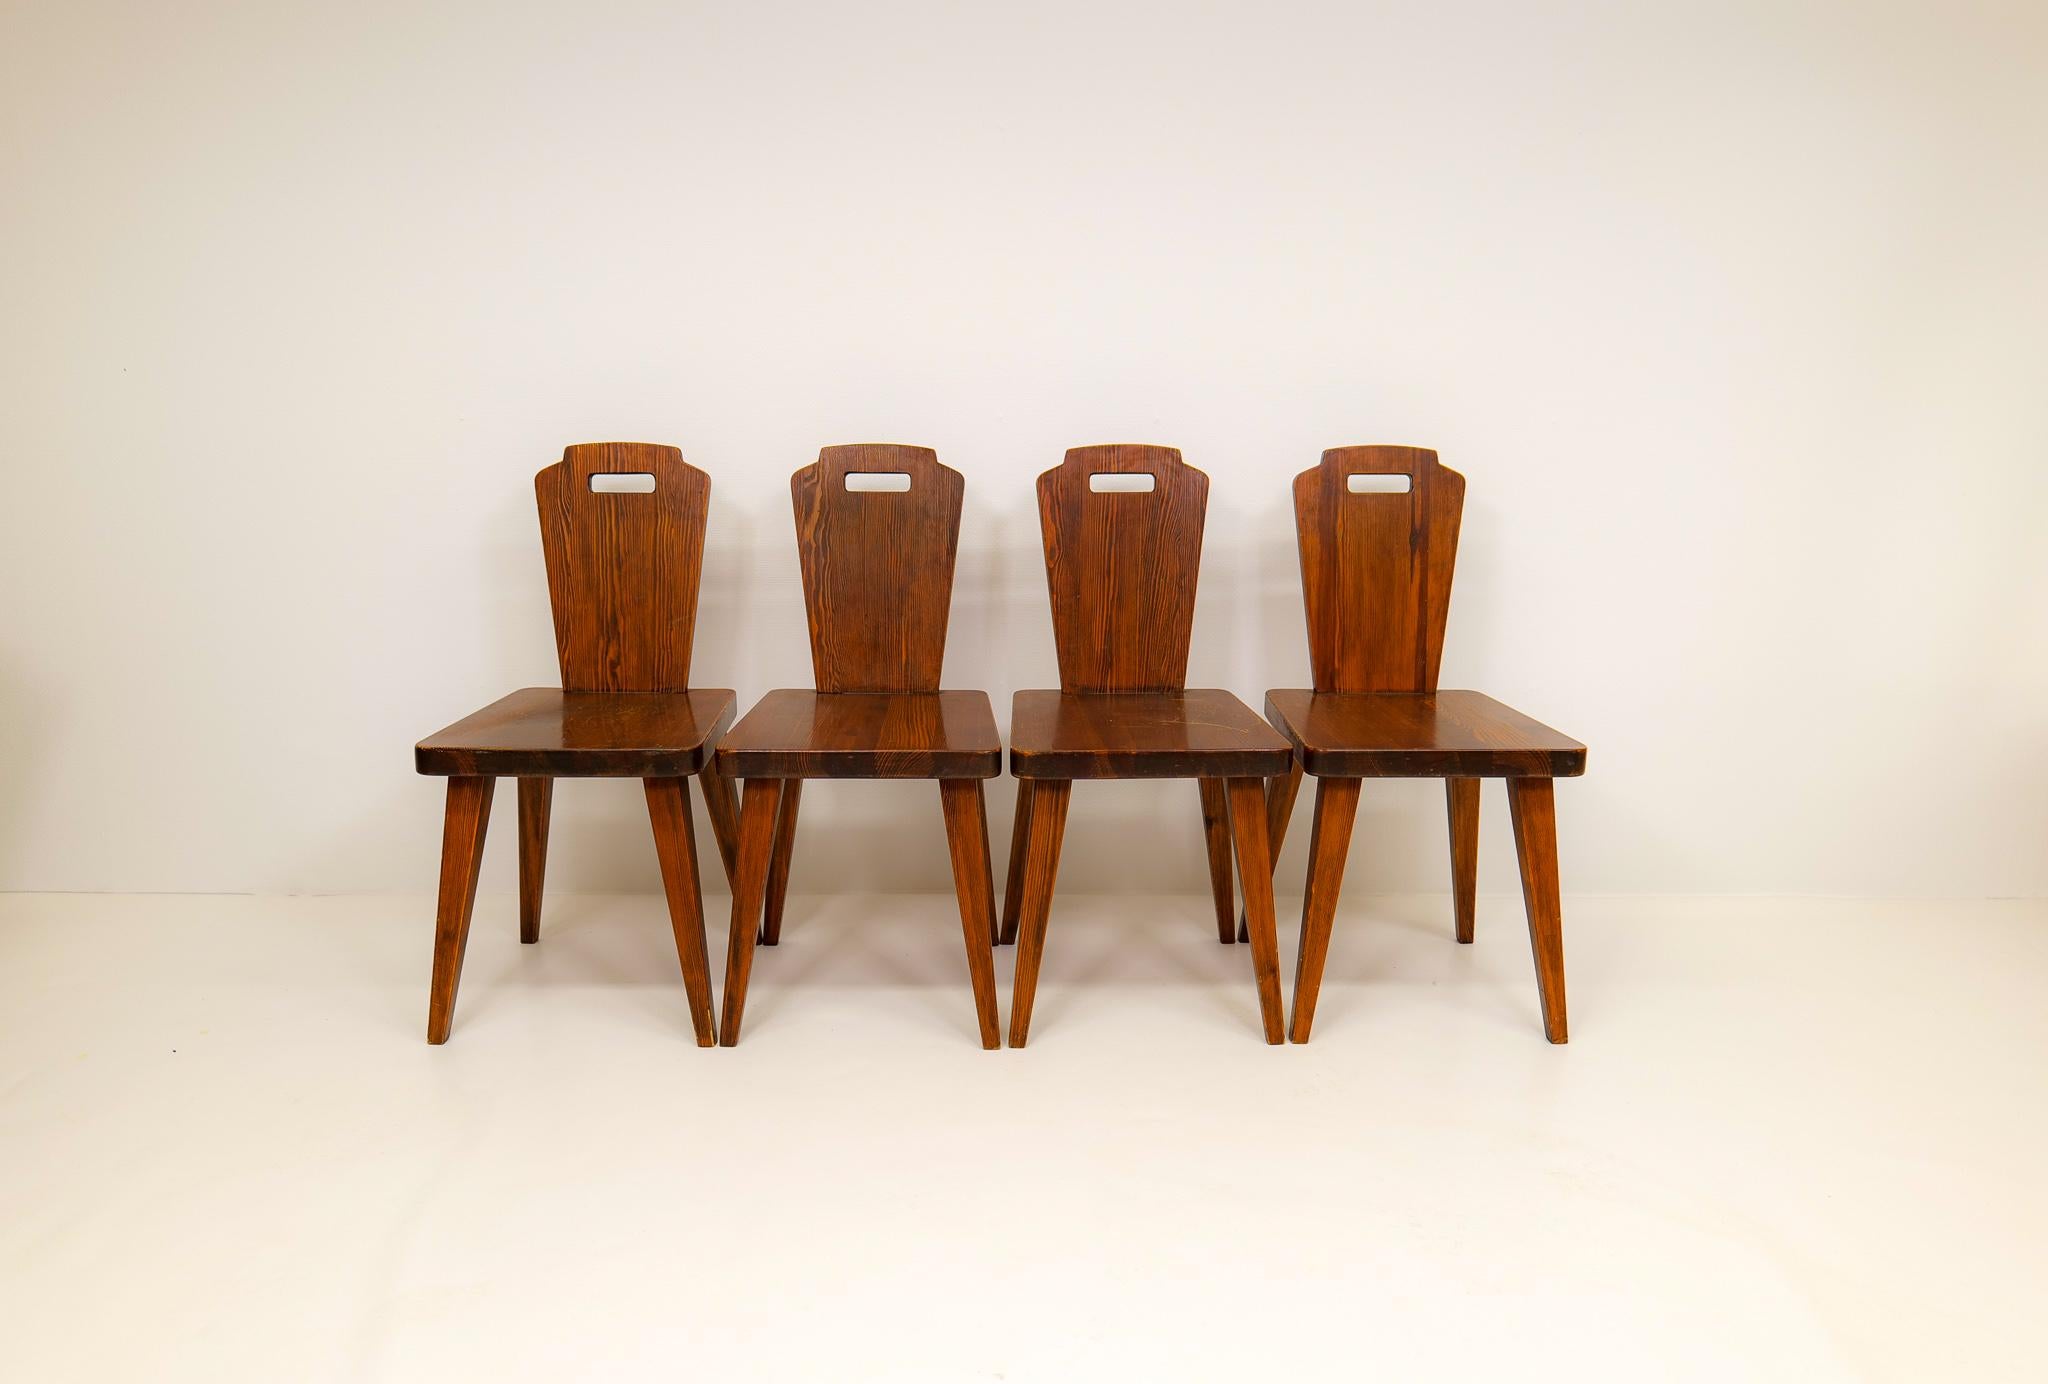 Mid-20th Century Swedish Modern Dining Chairs in Pine Attributed to Bo Fjaestad, 1940s For Sale